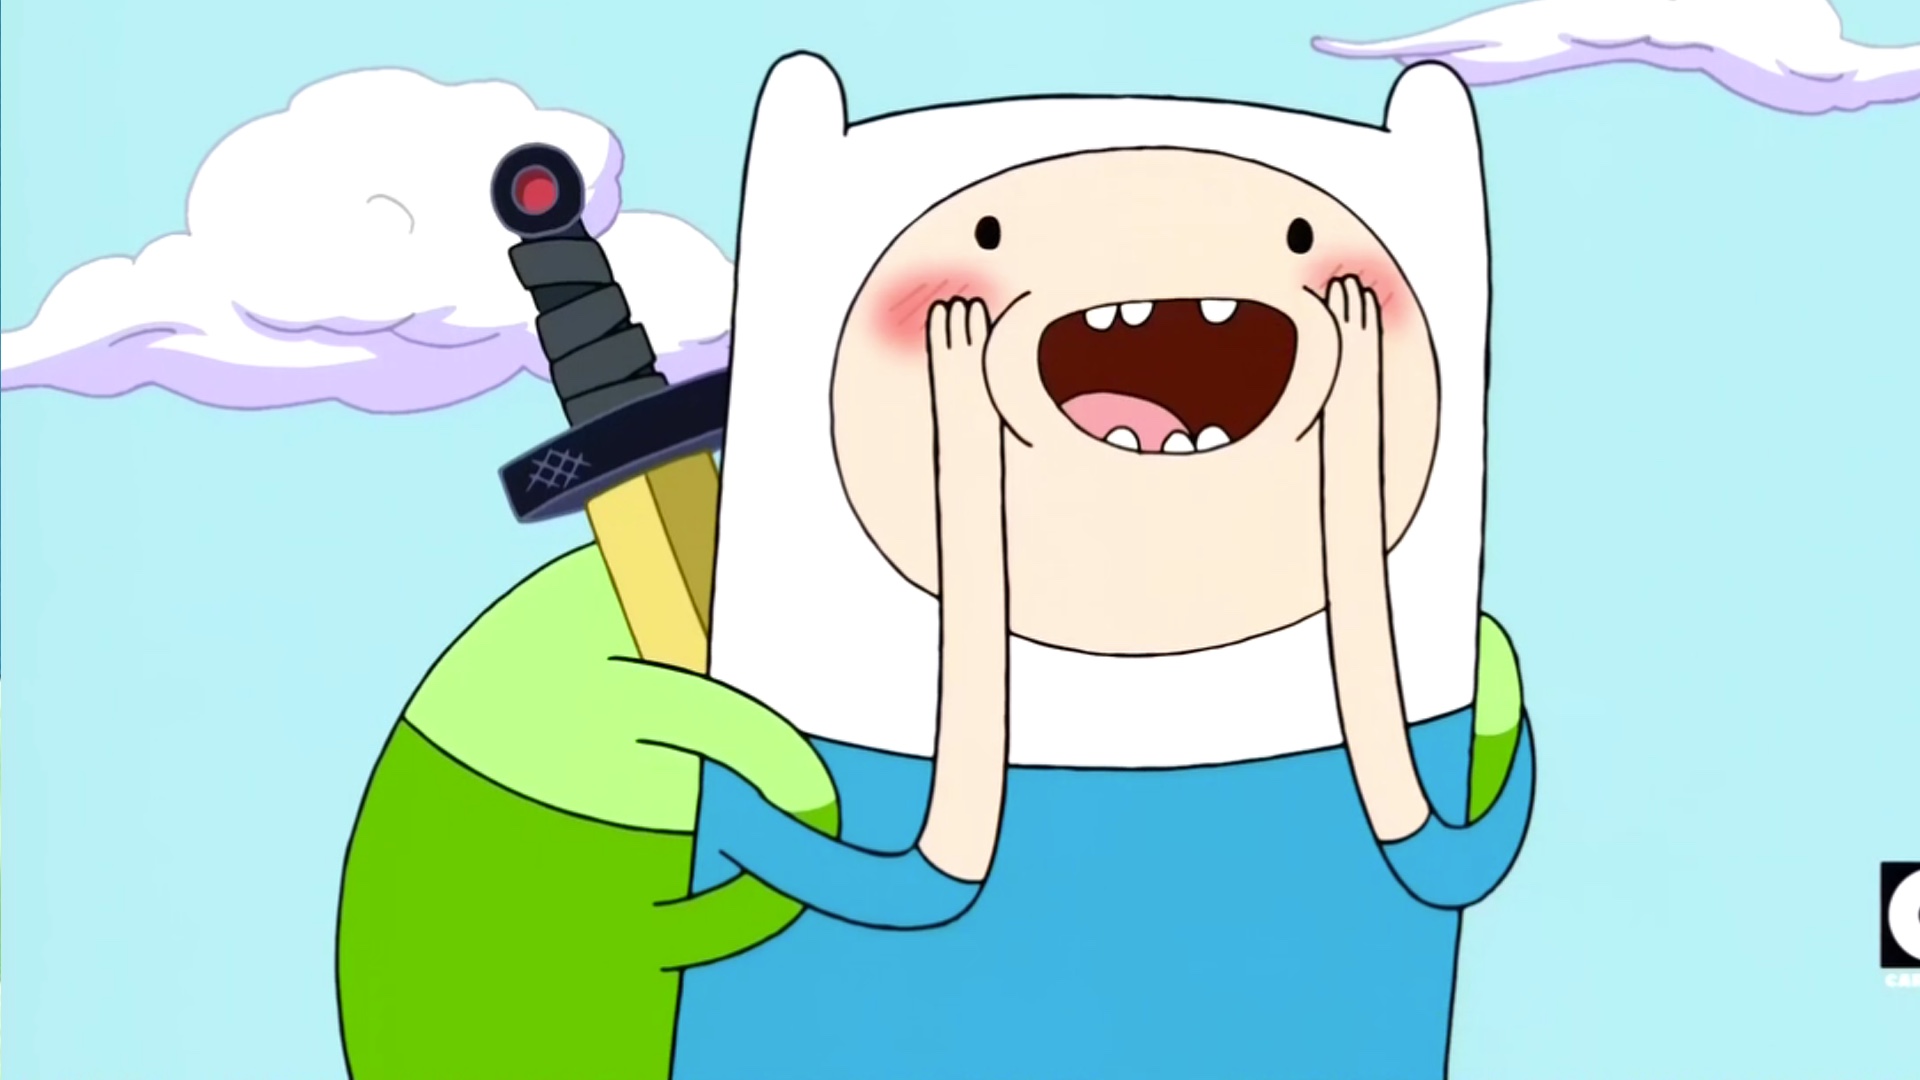 This Real Life Version of Finn From ADVENTURE TIME Is the Stuff of Nightmar...